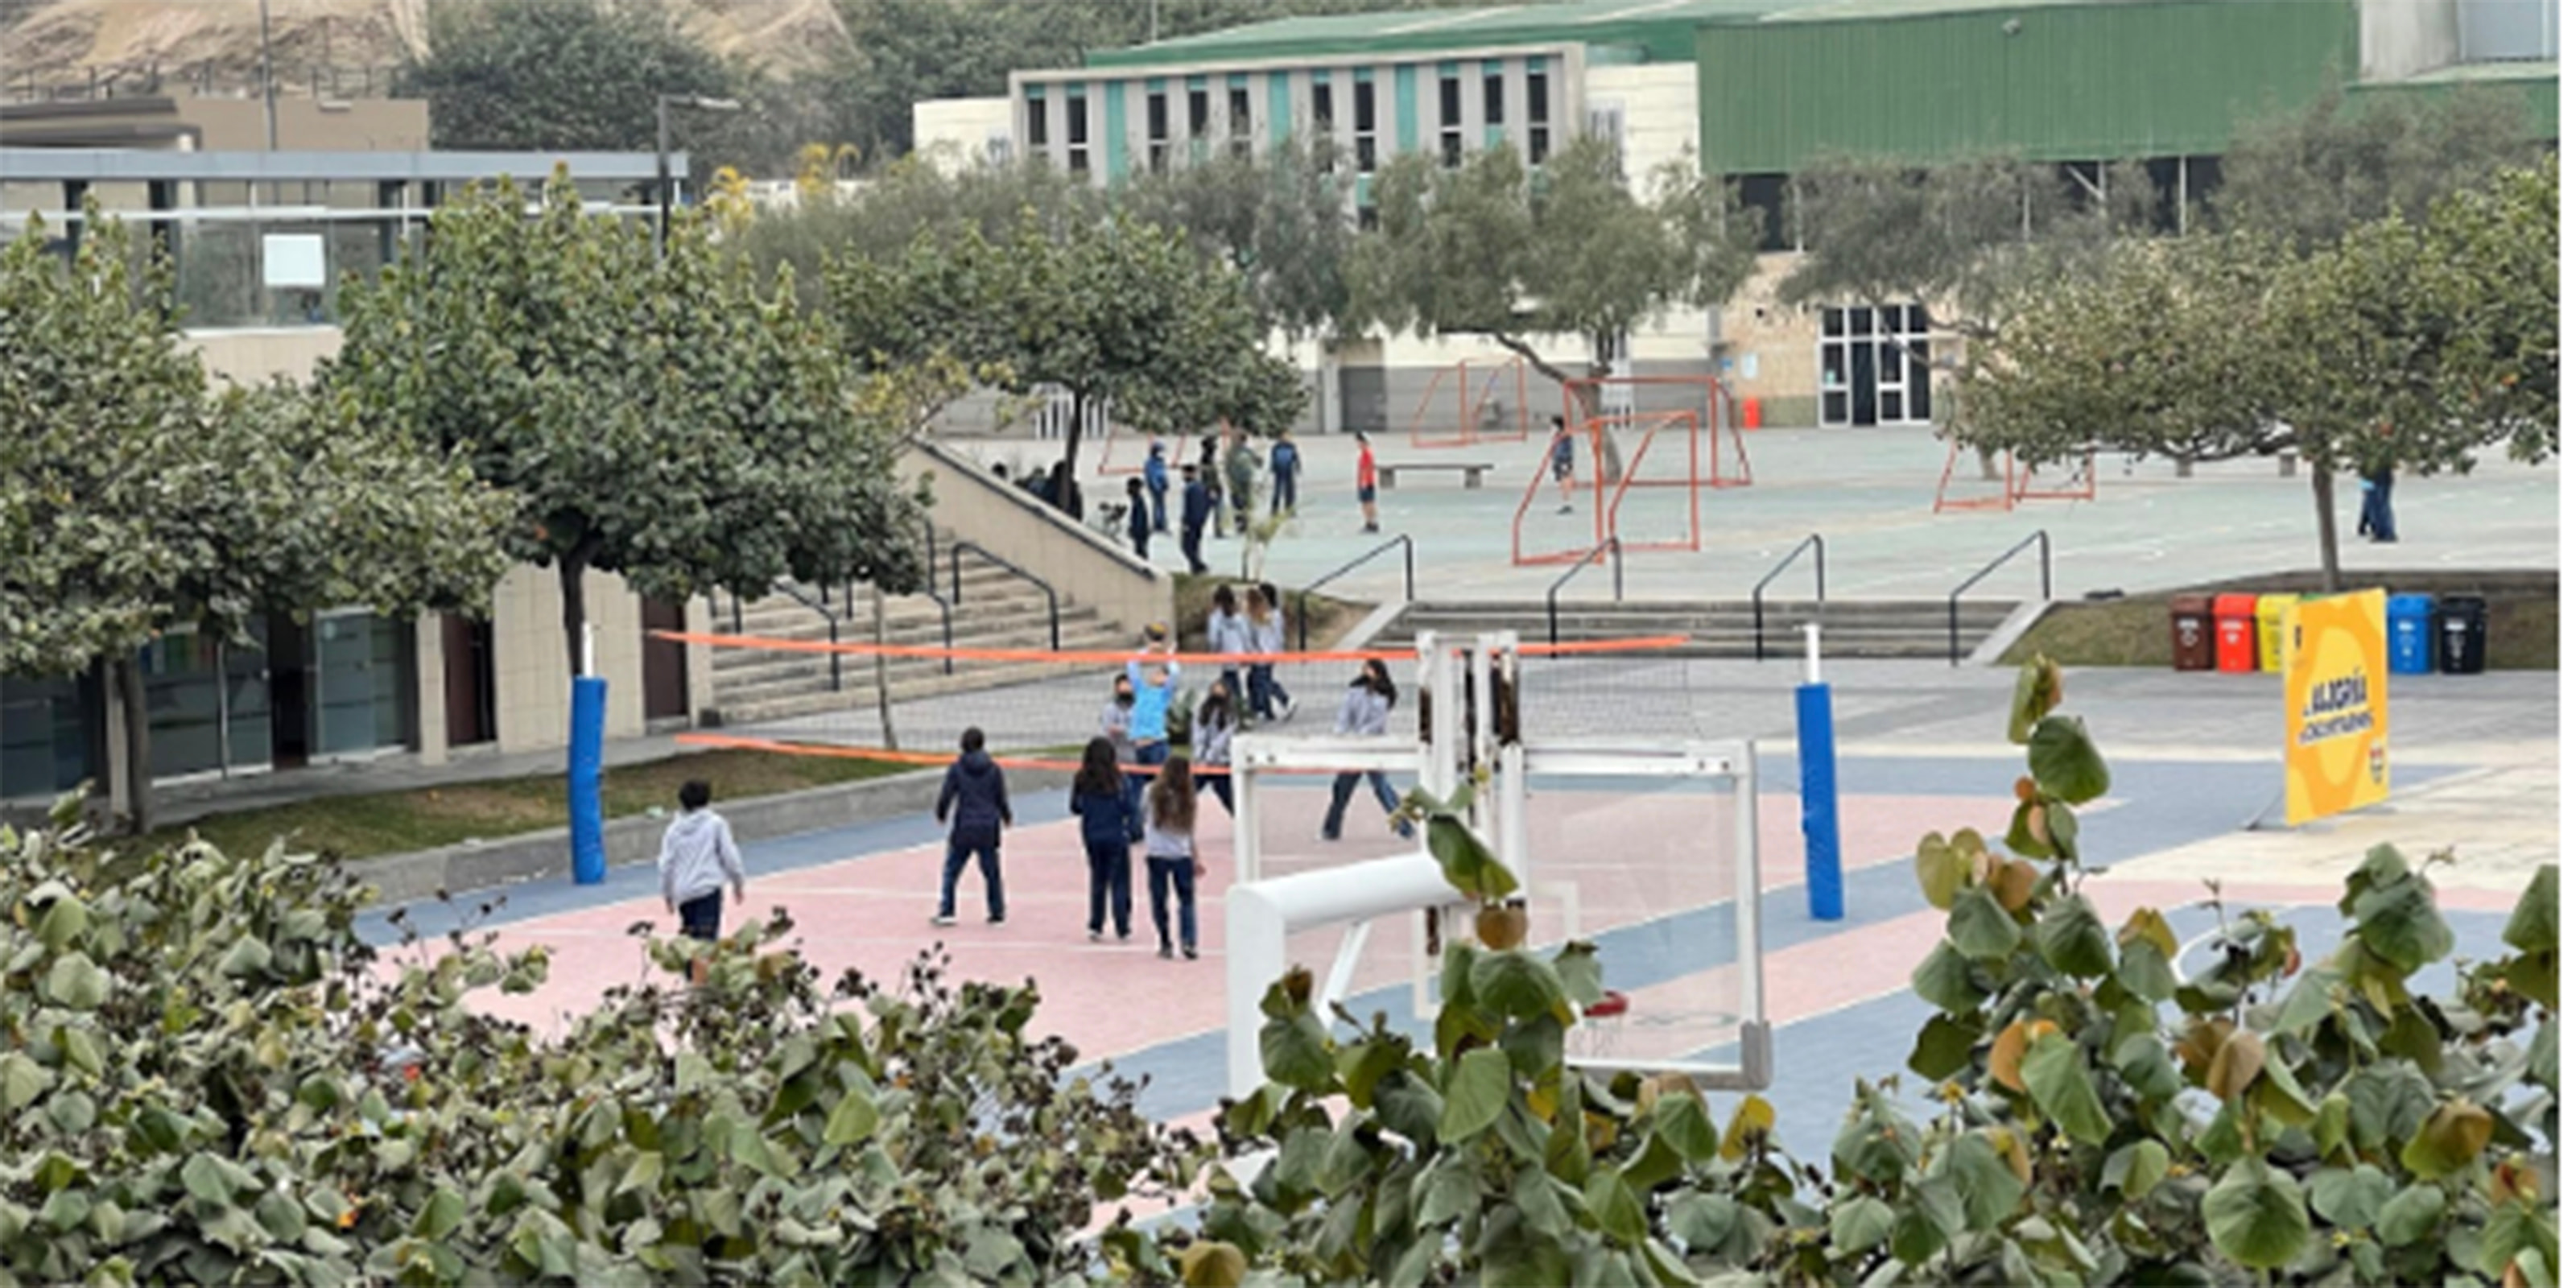 Students playing volleyball in outdoor courtyard